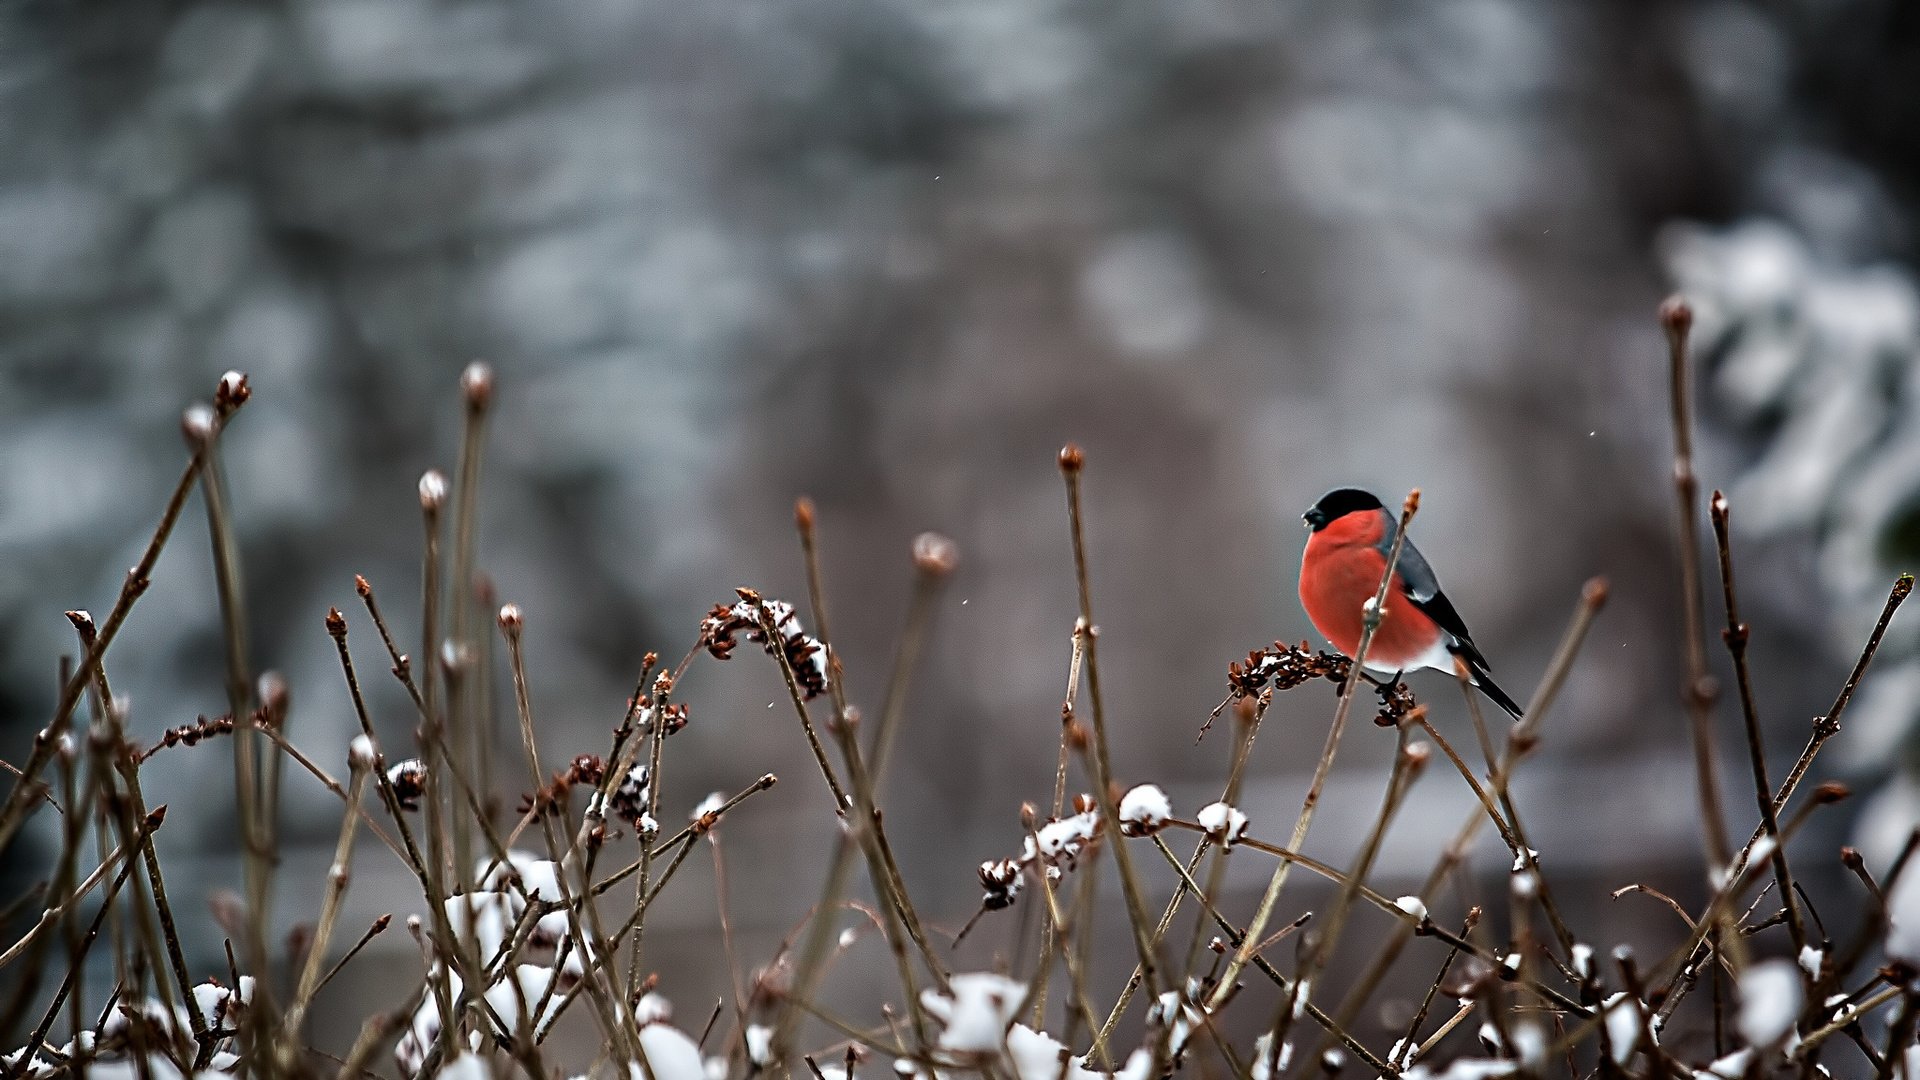 snow branches bird red animal winter snow nature wallpaper background 1920x1080